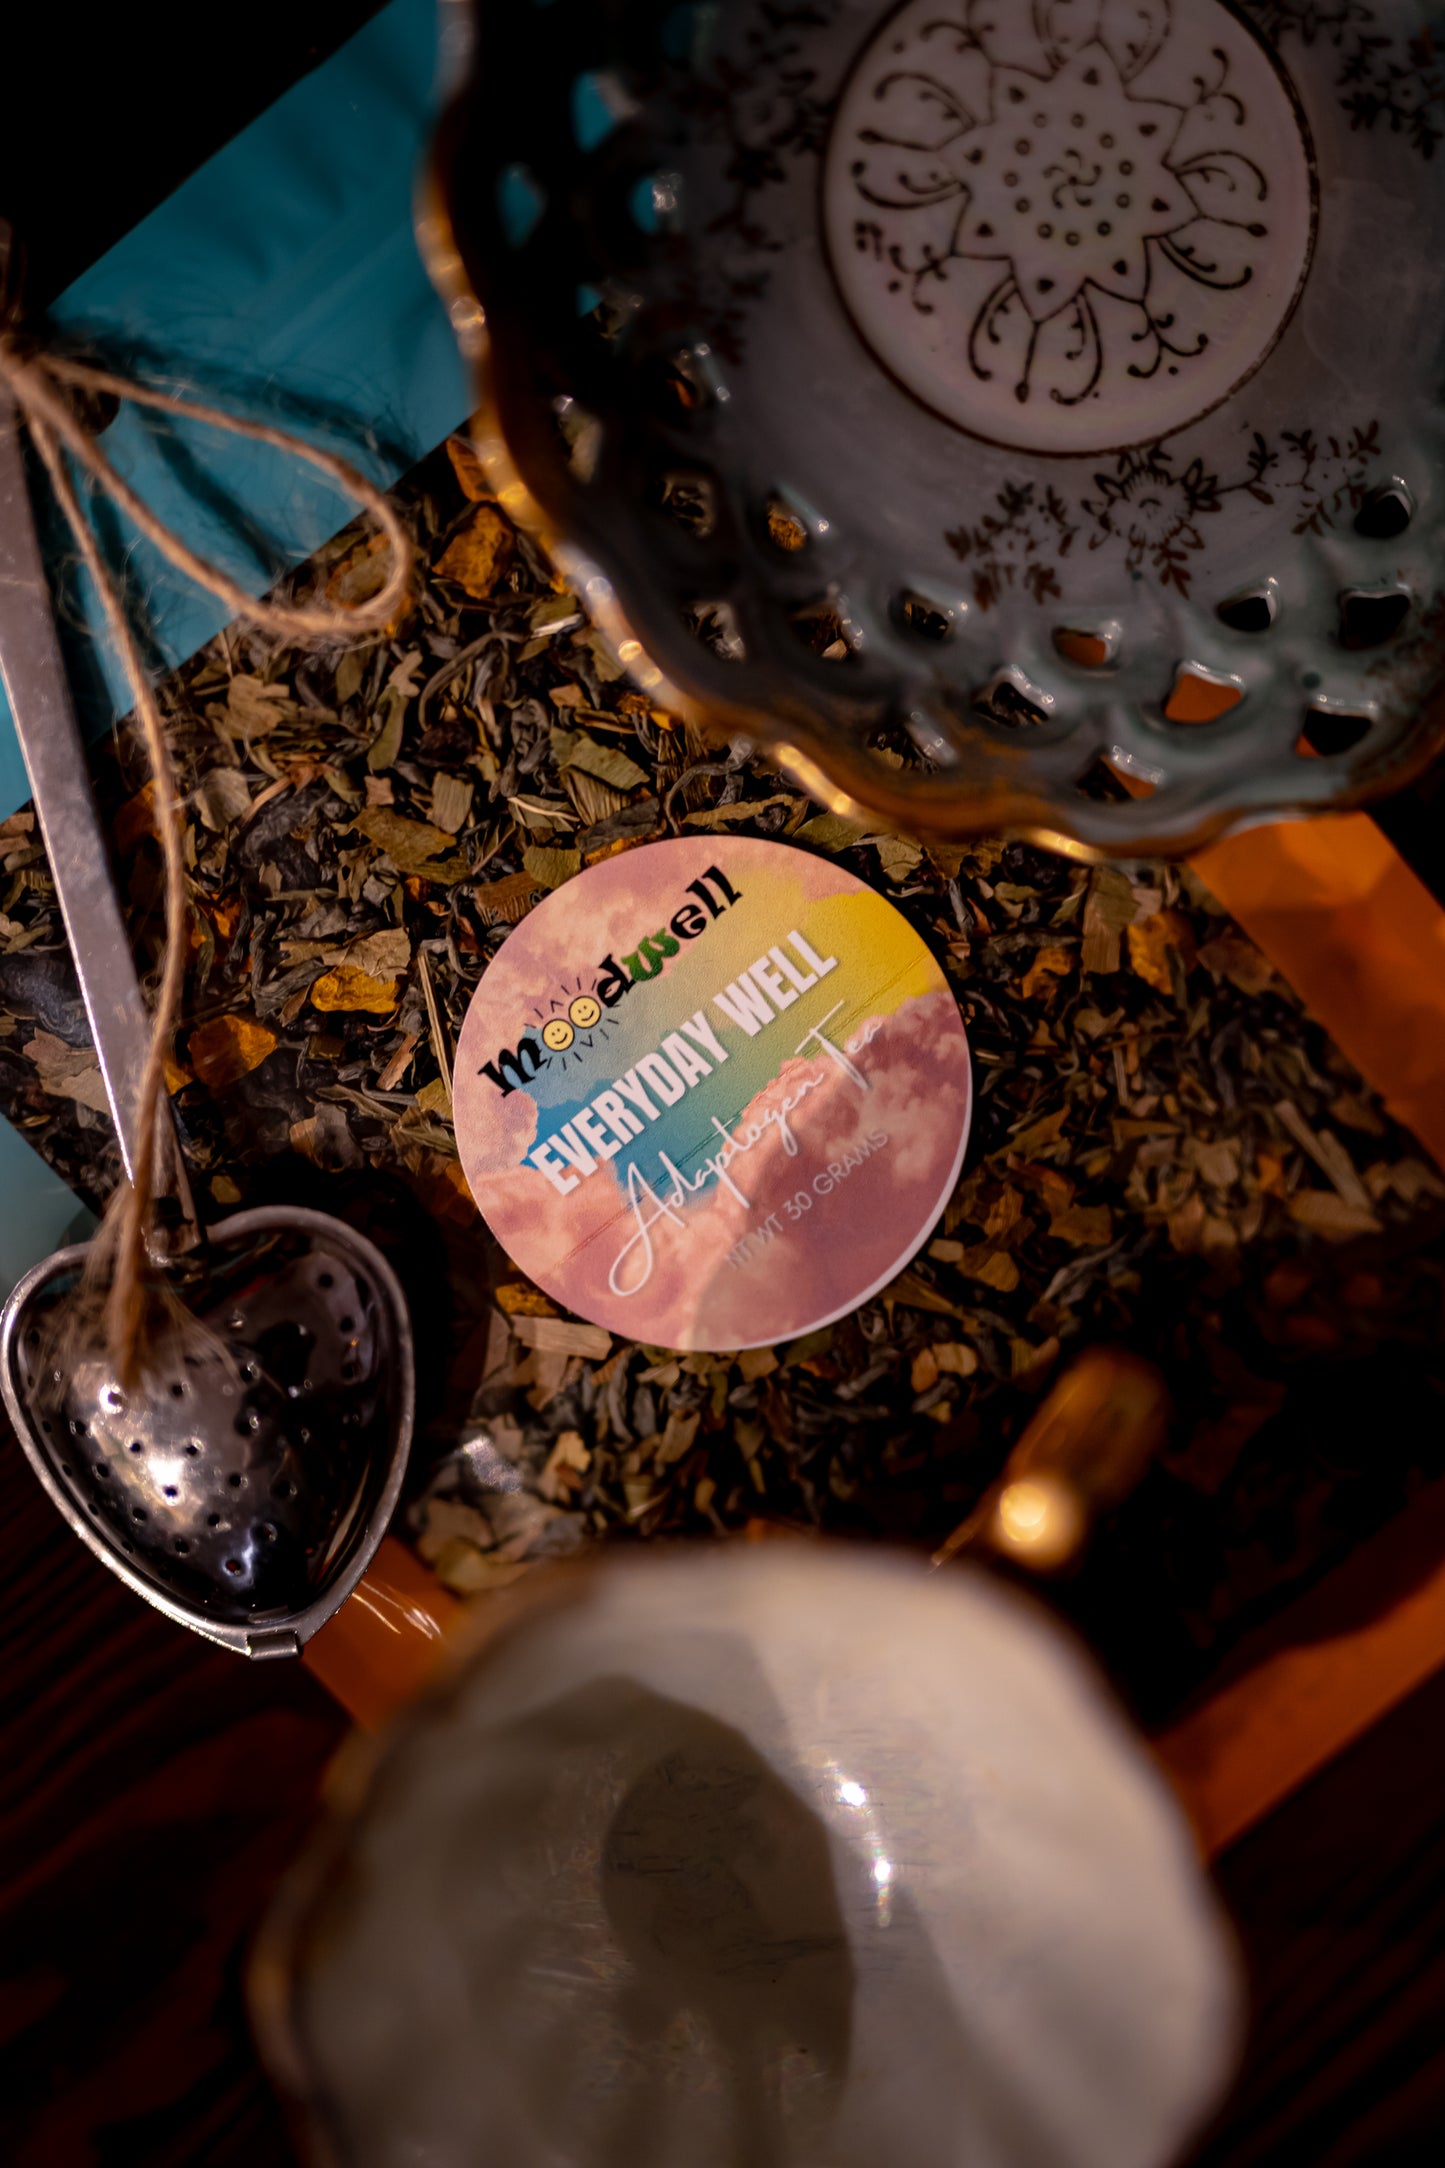 Everyday Wellness Tea in it's practical resealable packaging is made for everyday wellness on the go. The looseleaf hand mixed tea blend is made from elderberry, turmeric, gingko biloba, and green tea to enhance your day. 